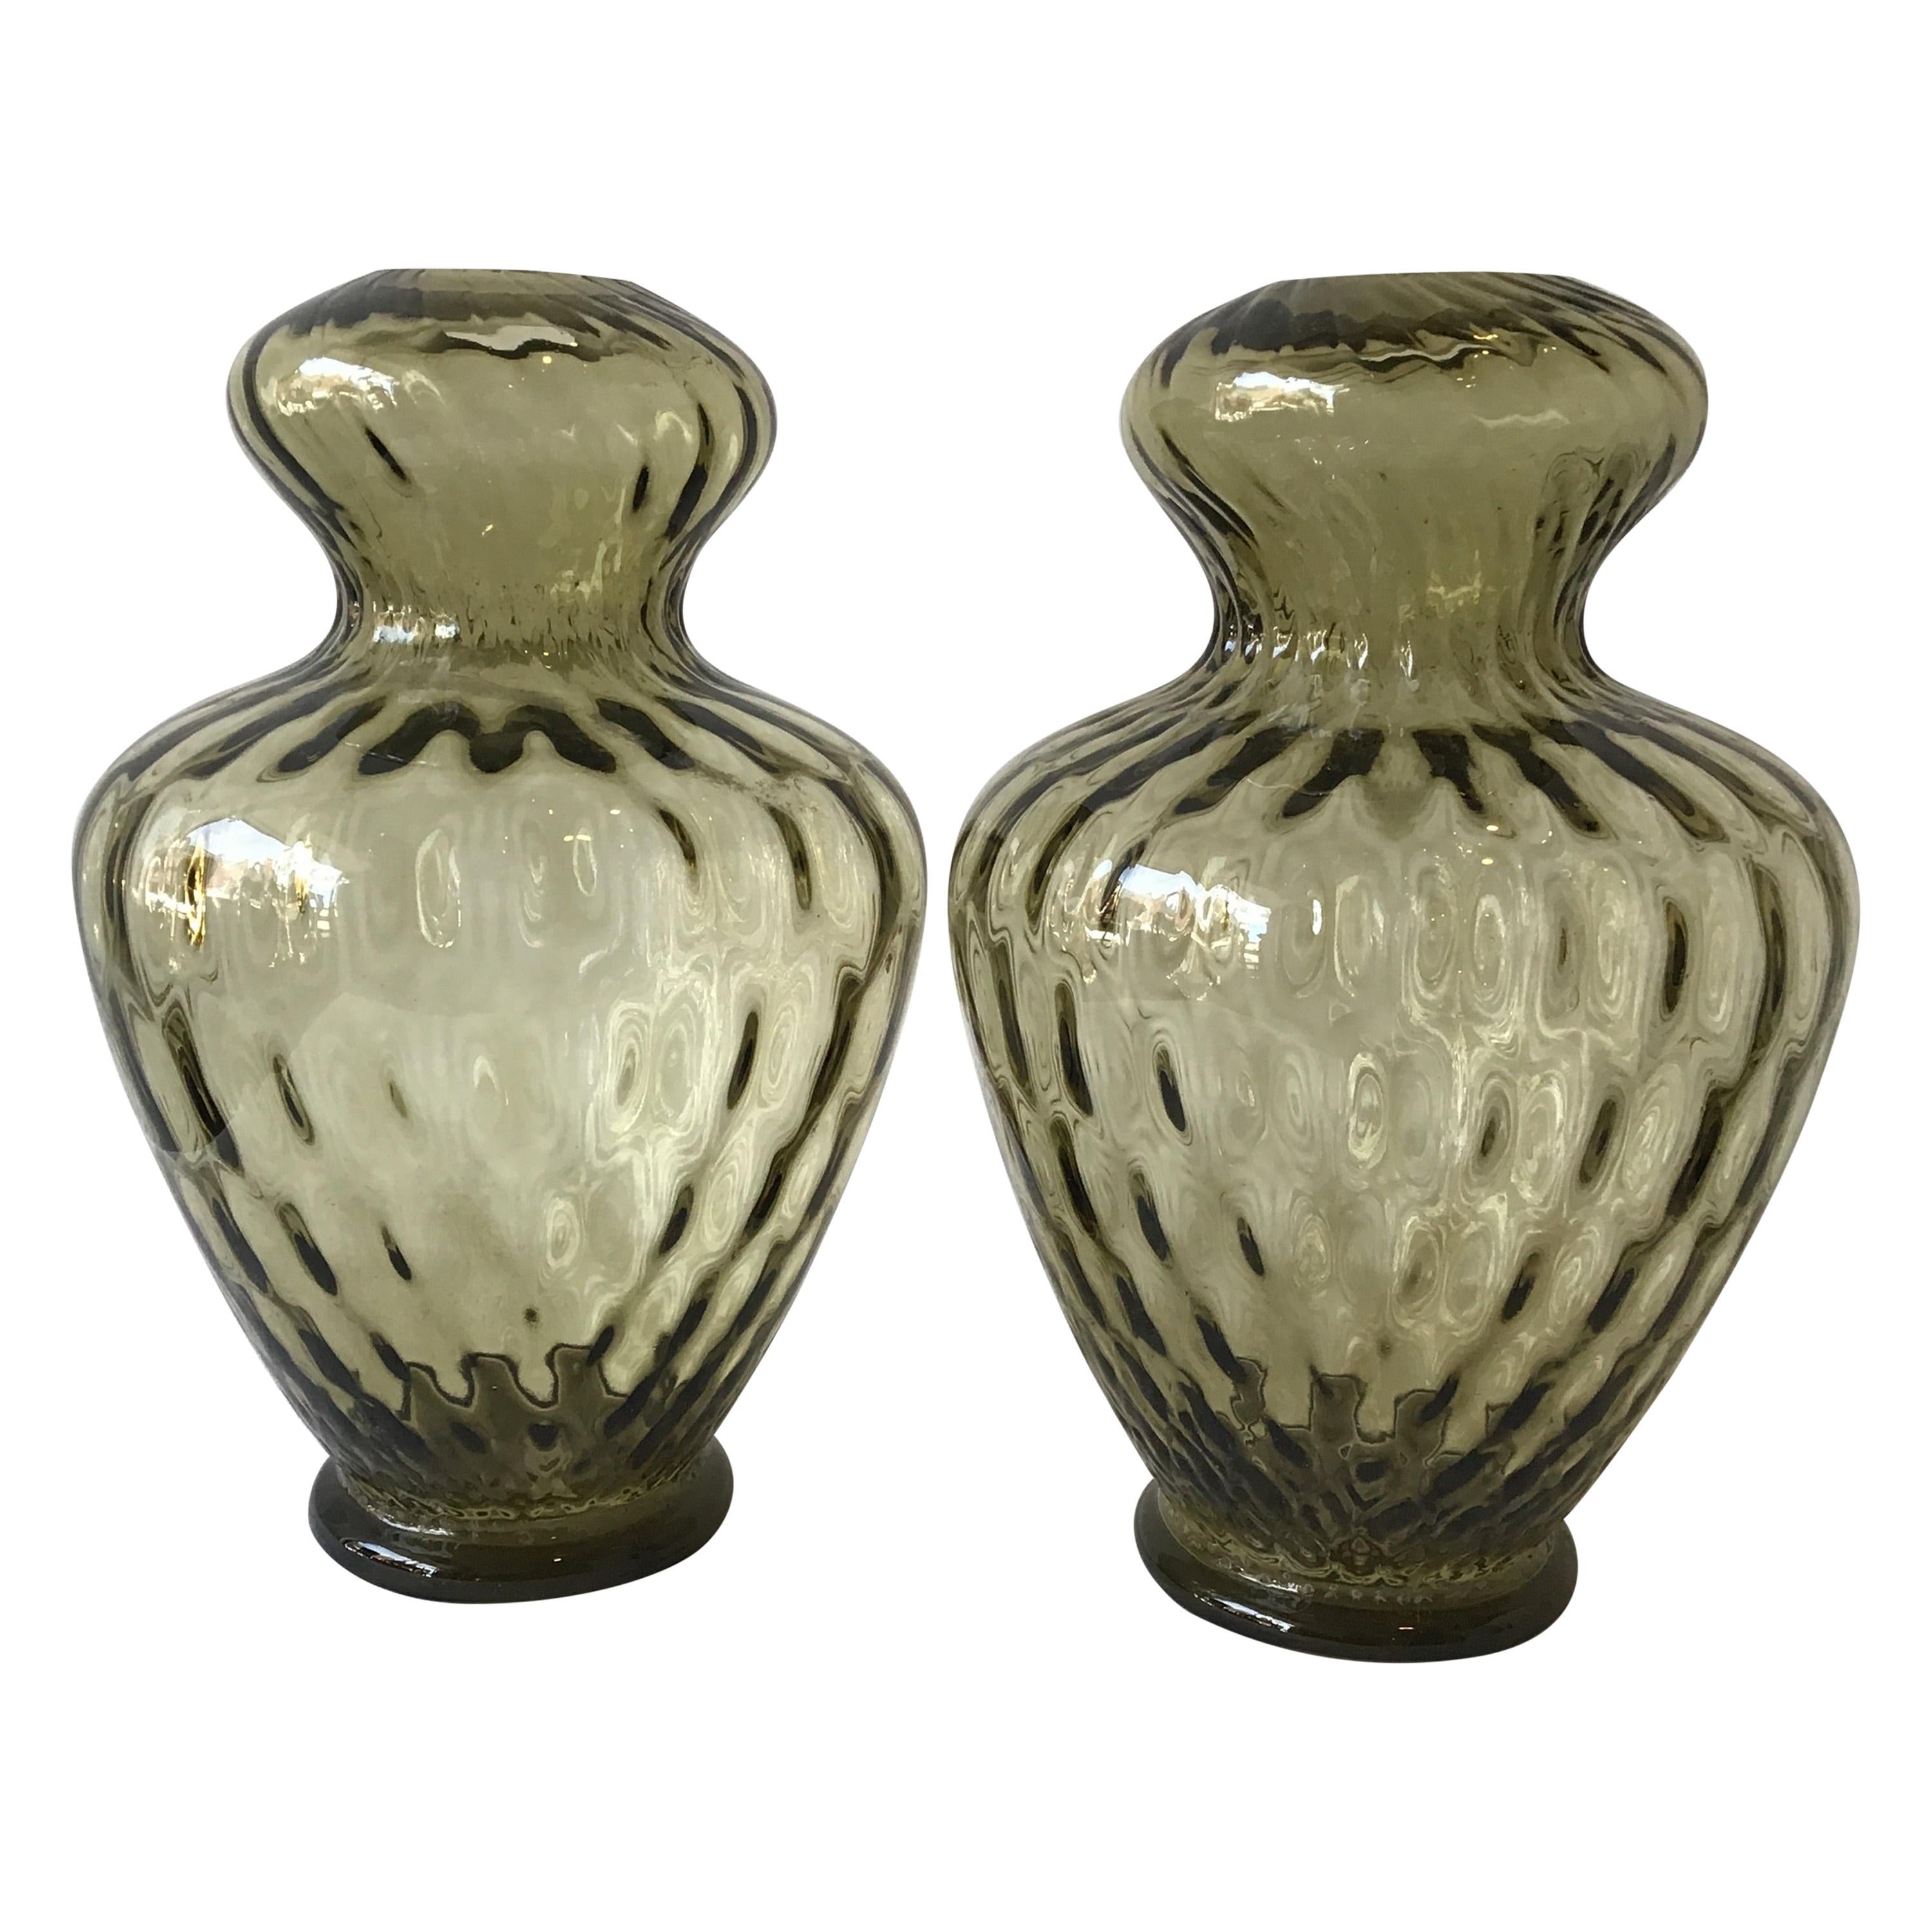 Pair of 1960s Smoked Olive Murano Lamps by Balboa